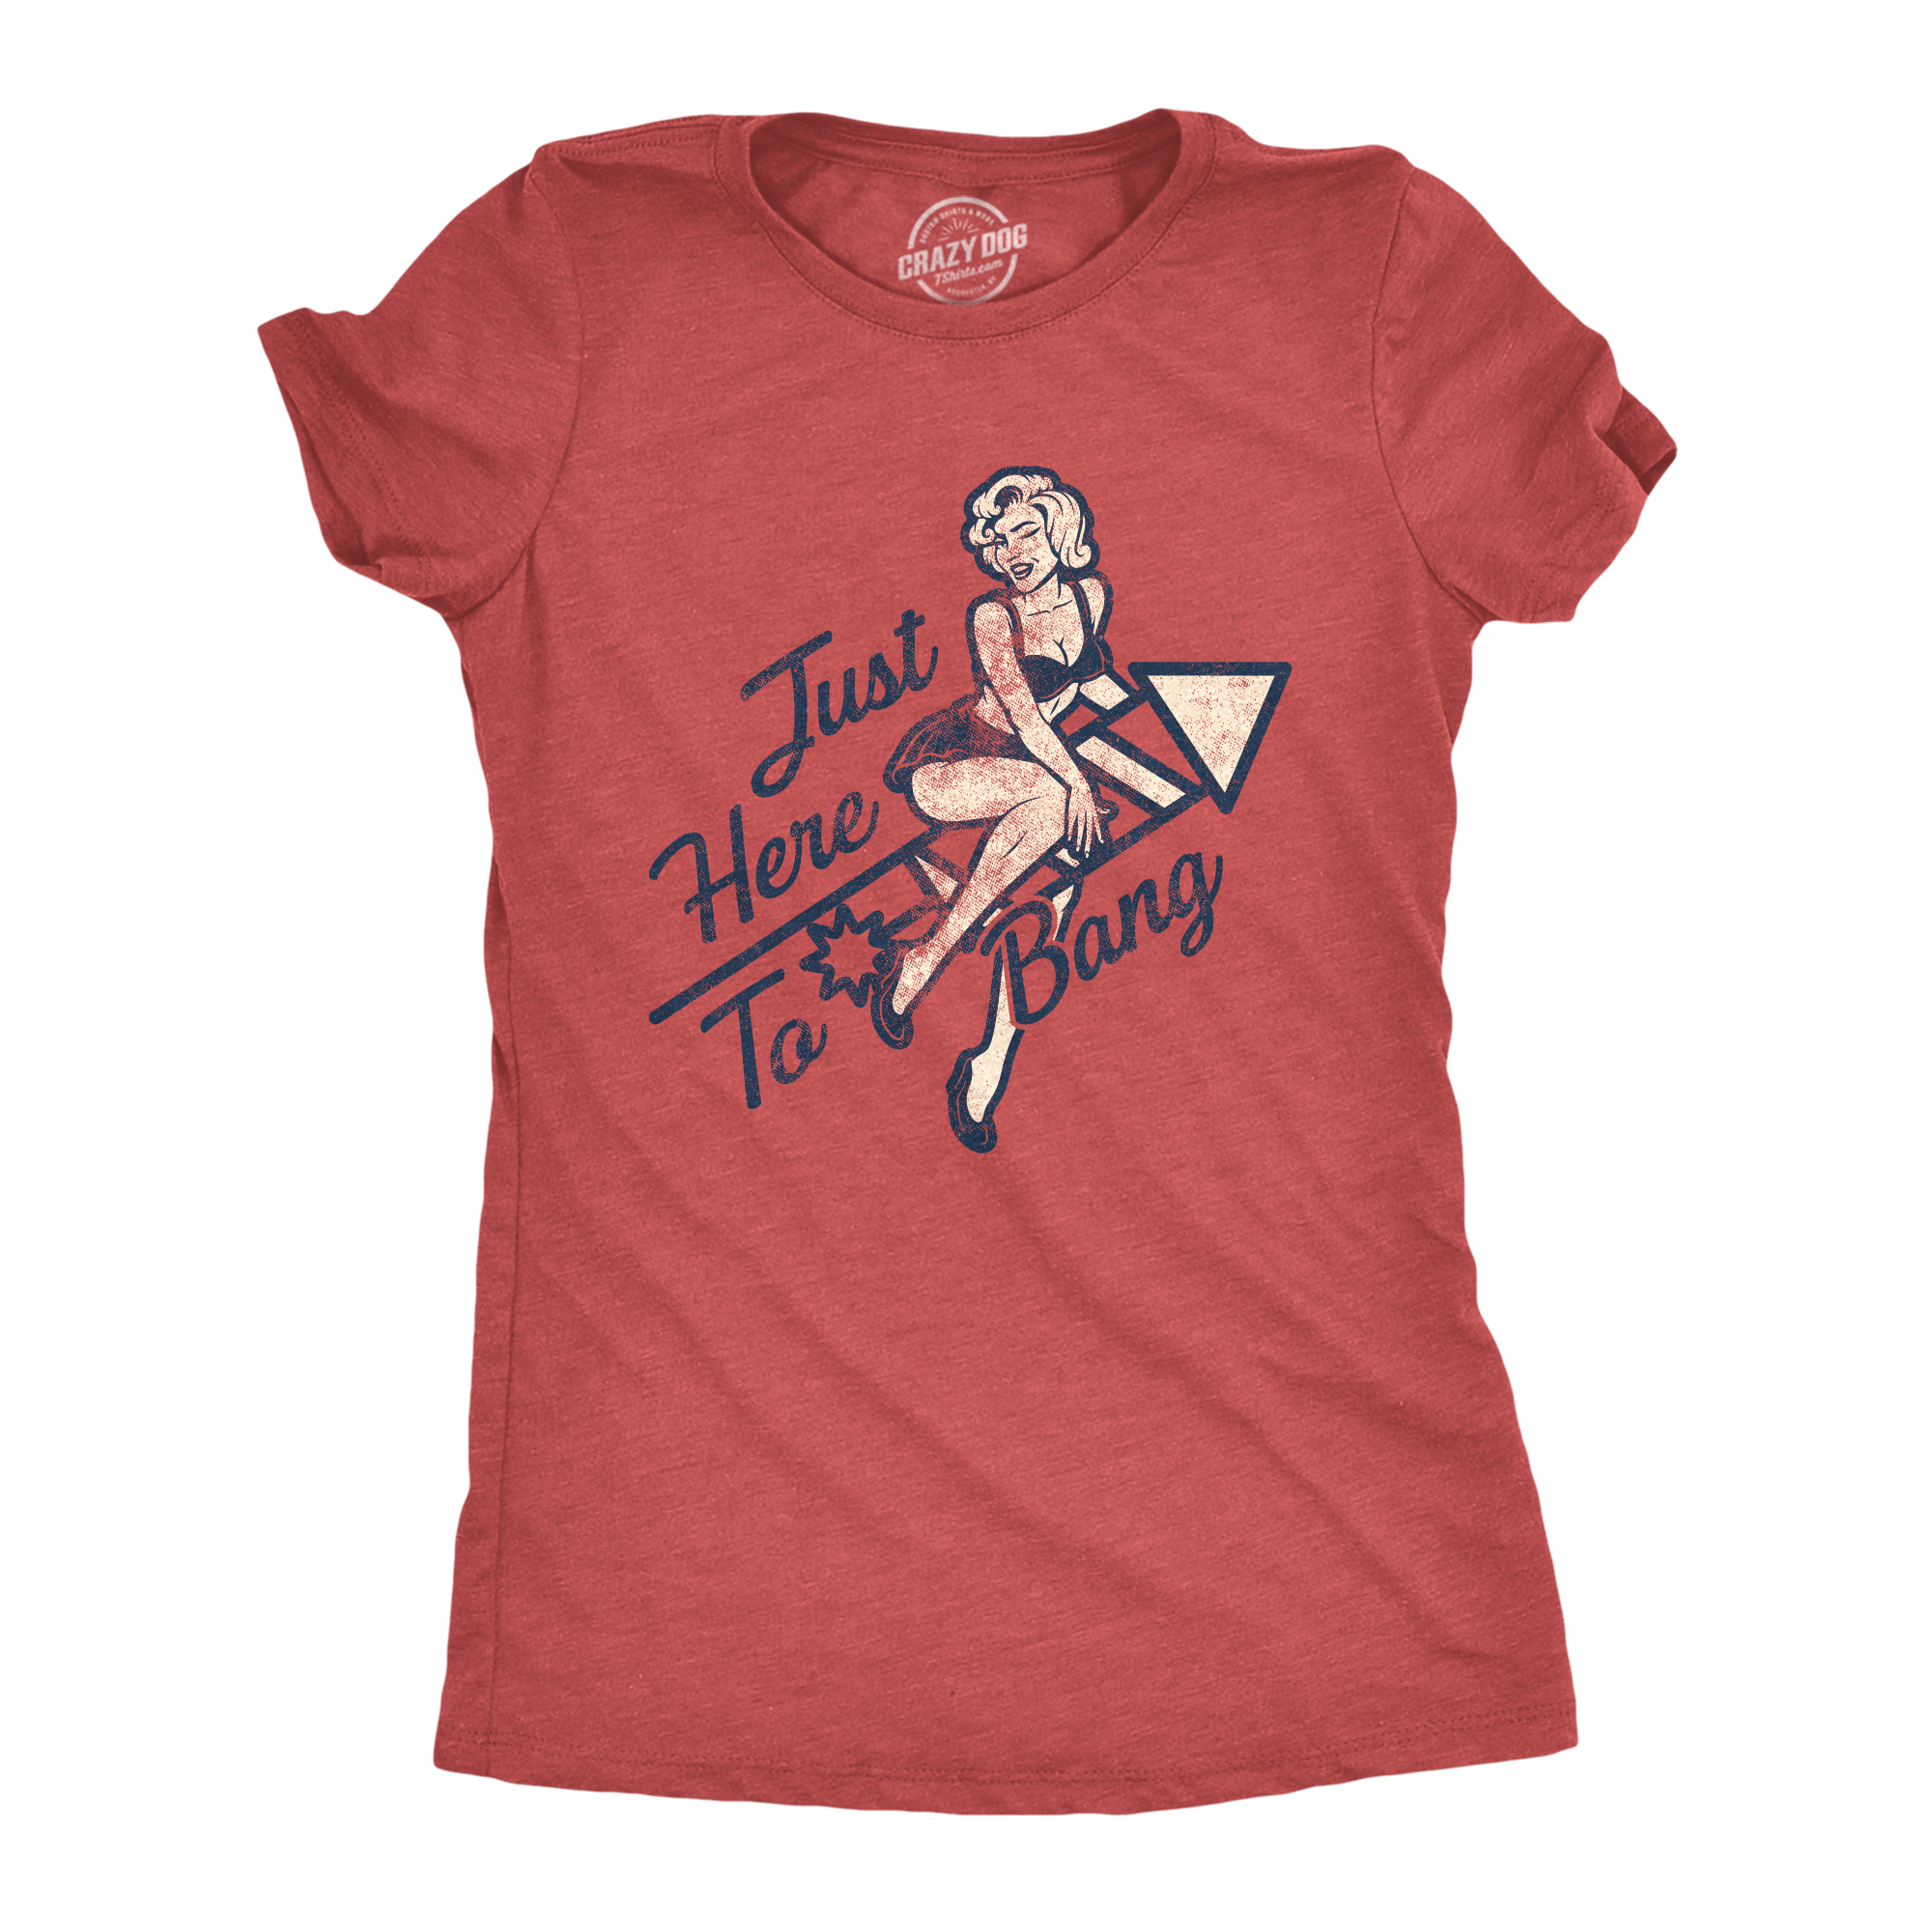 Womens Just Here To Bang Tshirt Funny Firework pin up Model USA Graphic Tee Womens Graphic Tees - image 1 of 8